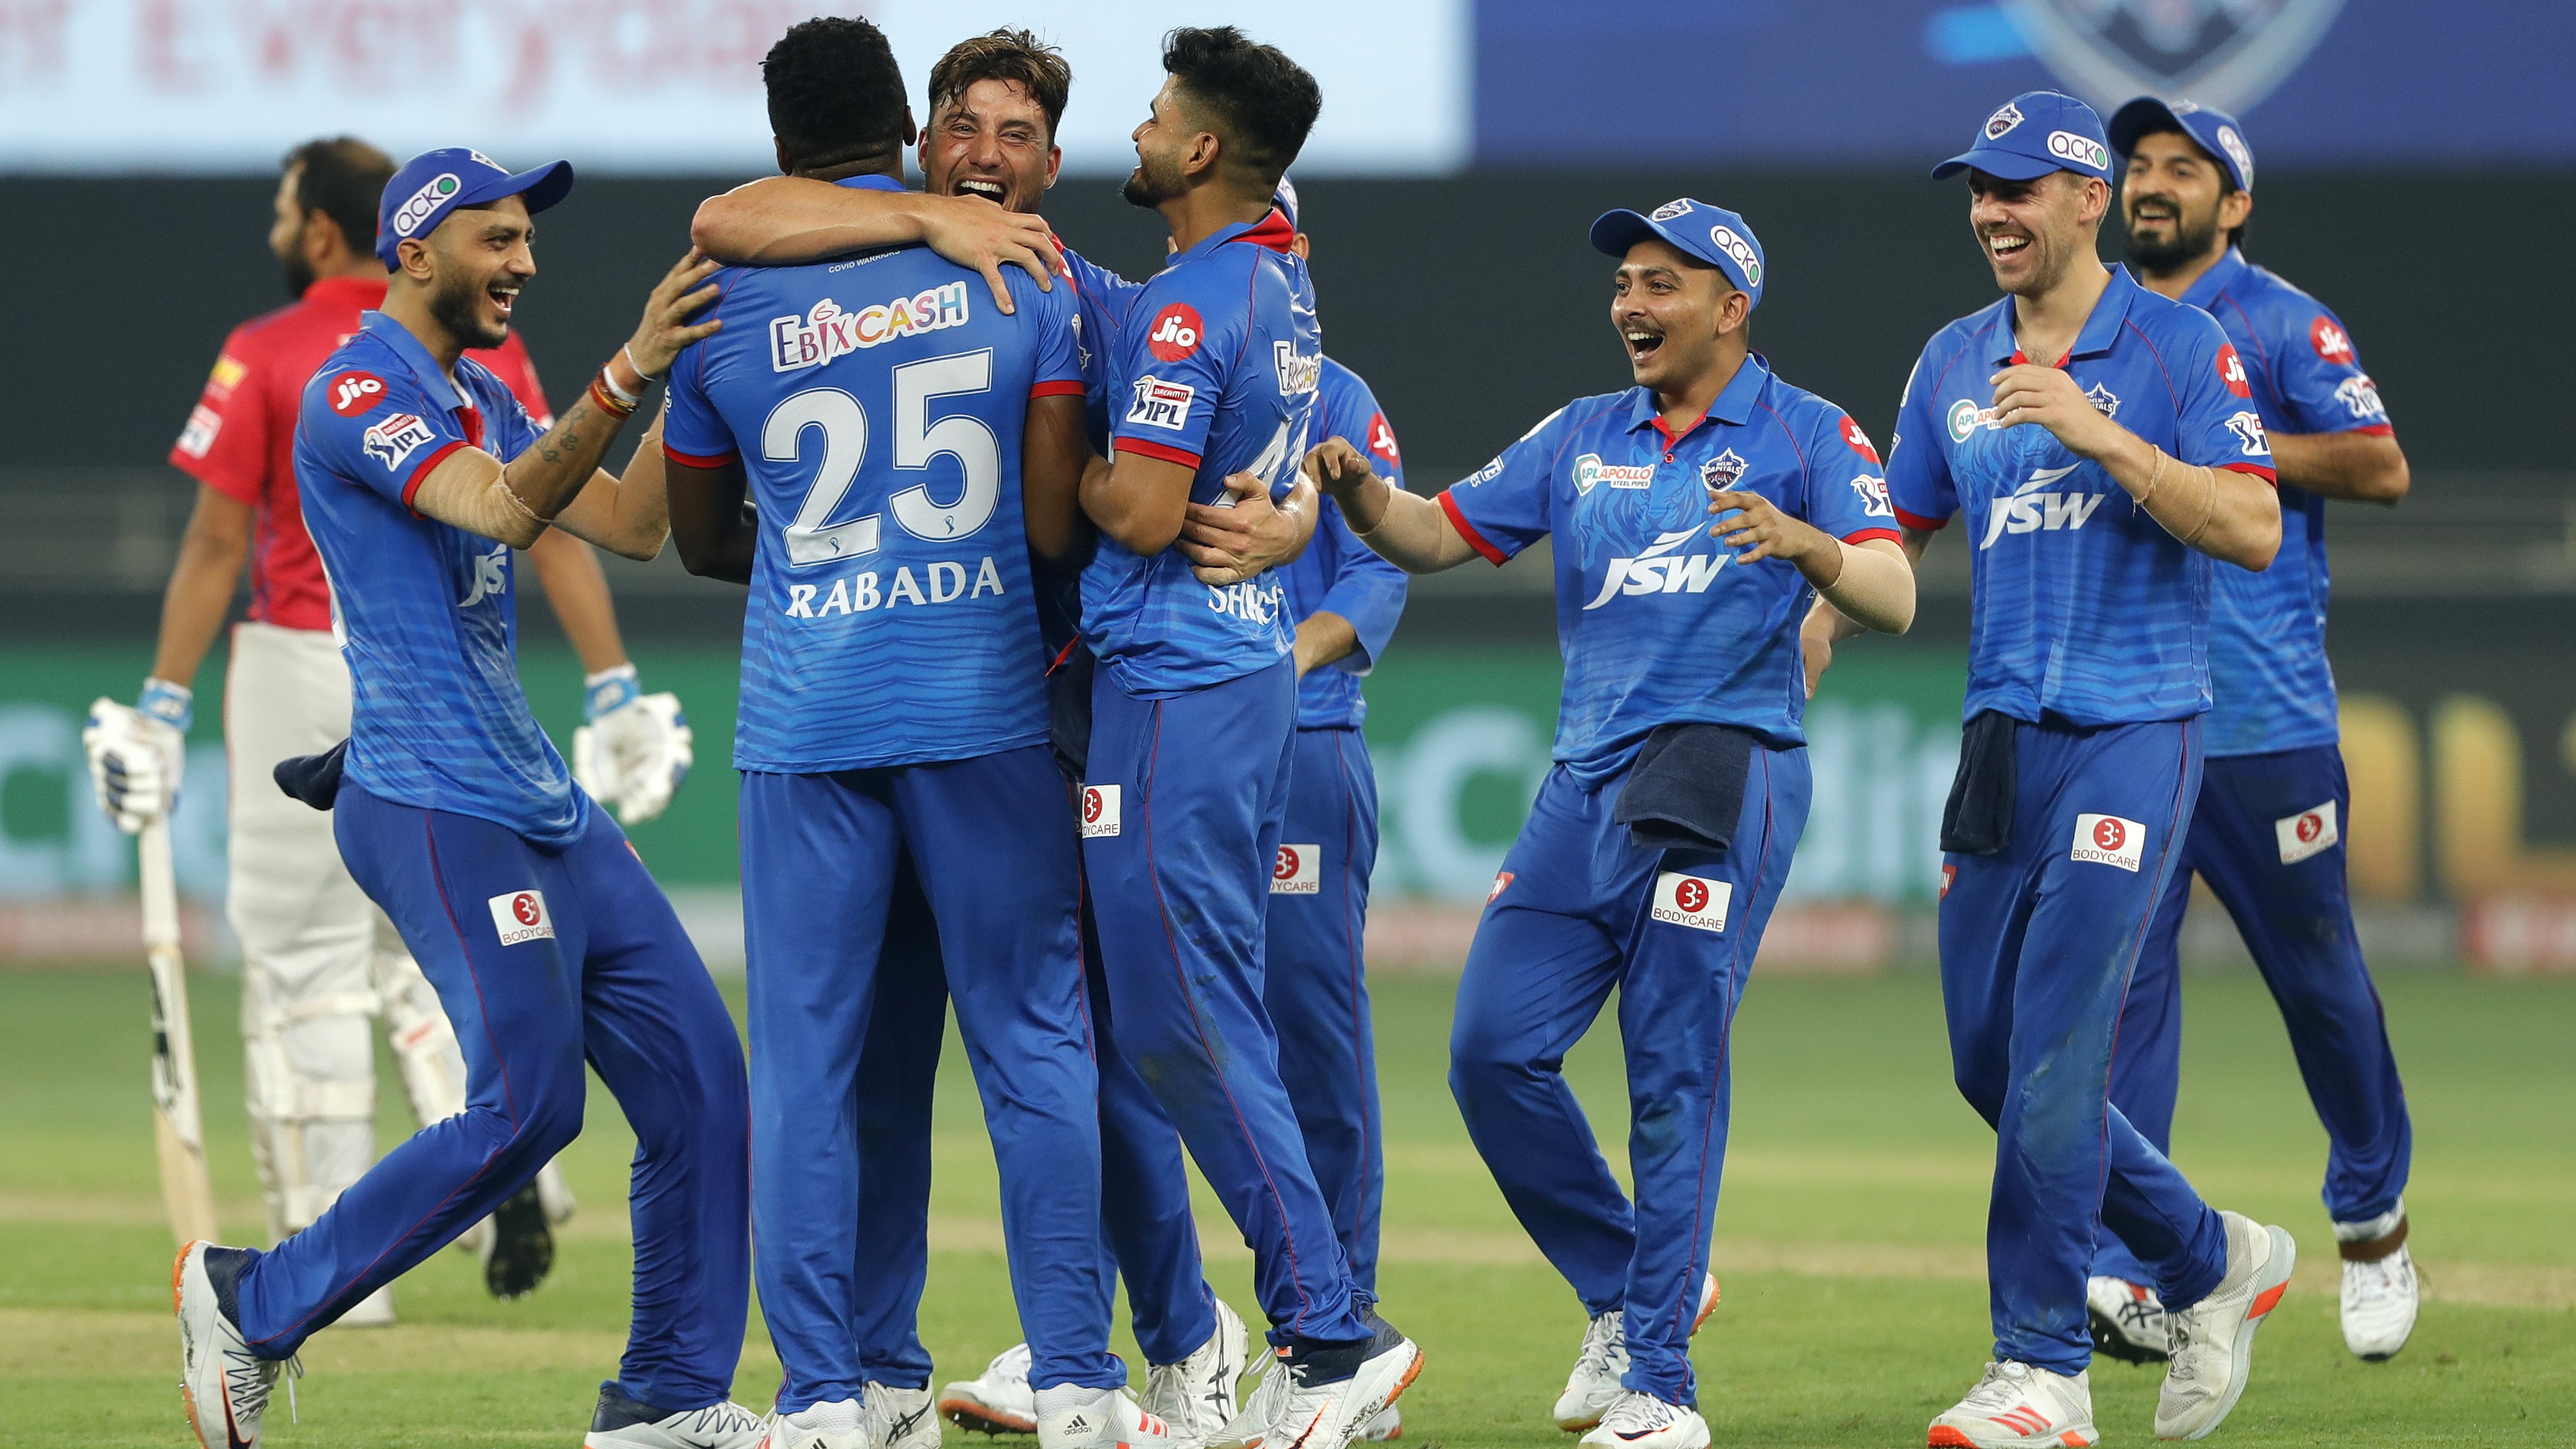 IPL 2021: Delhi Capitals – List of players retained and released